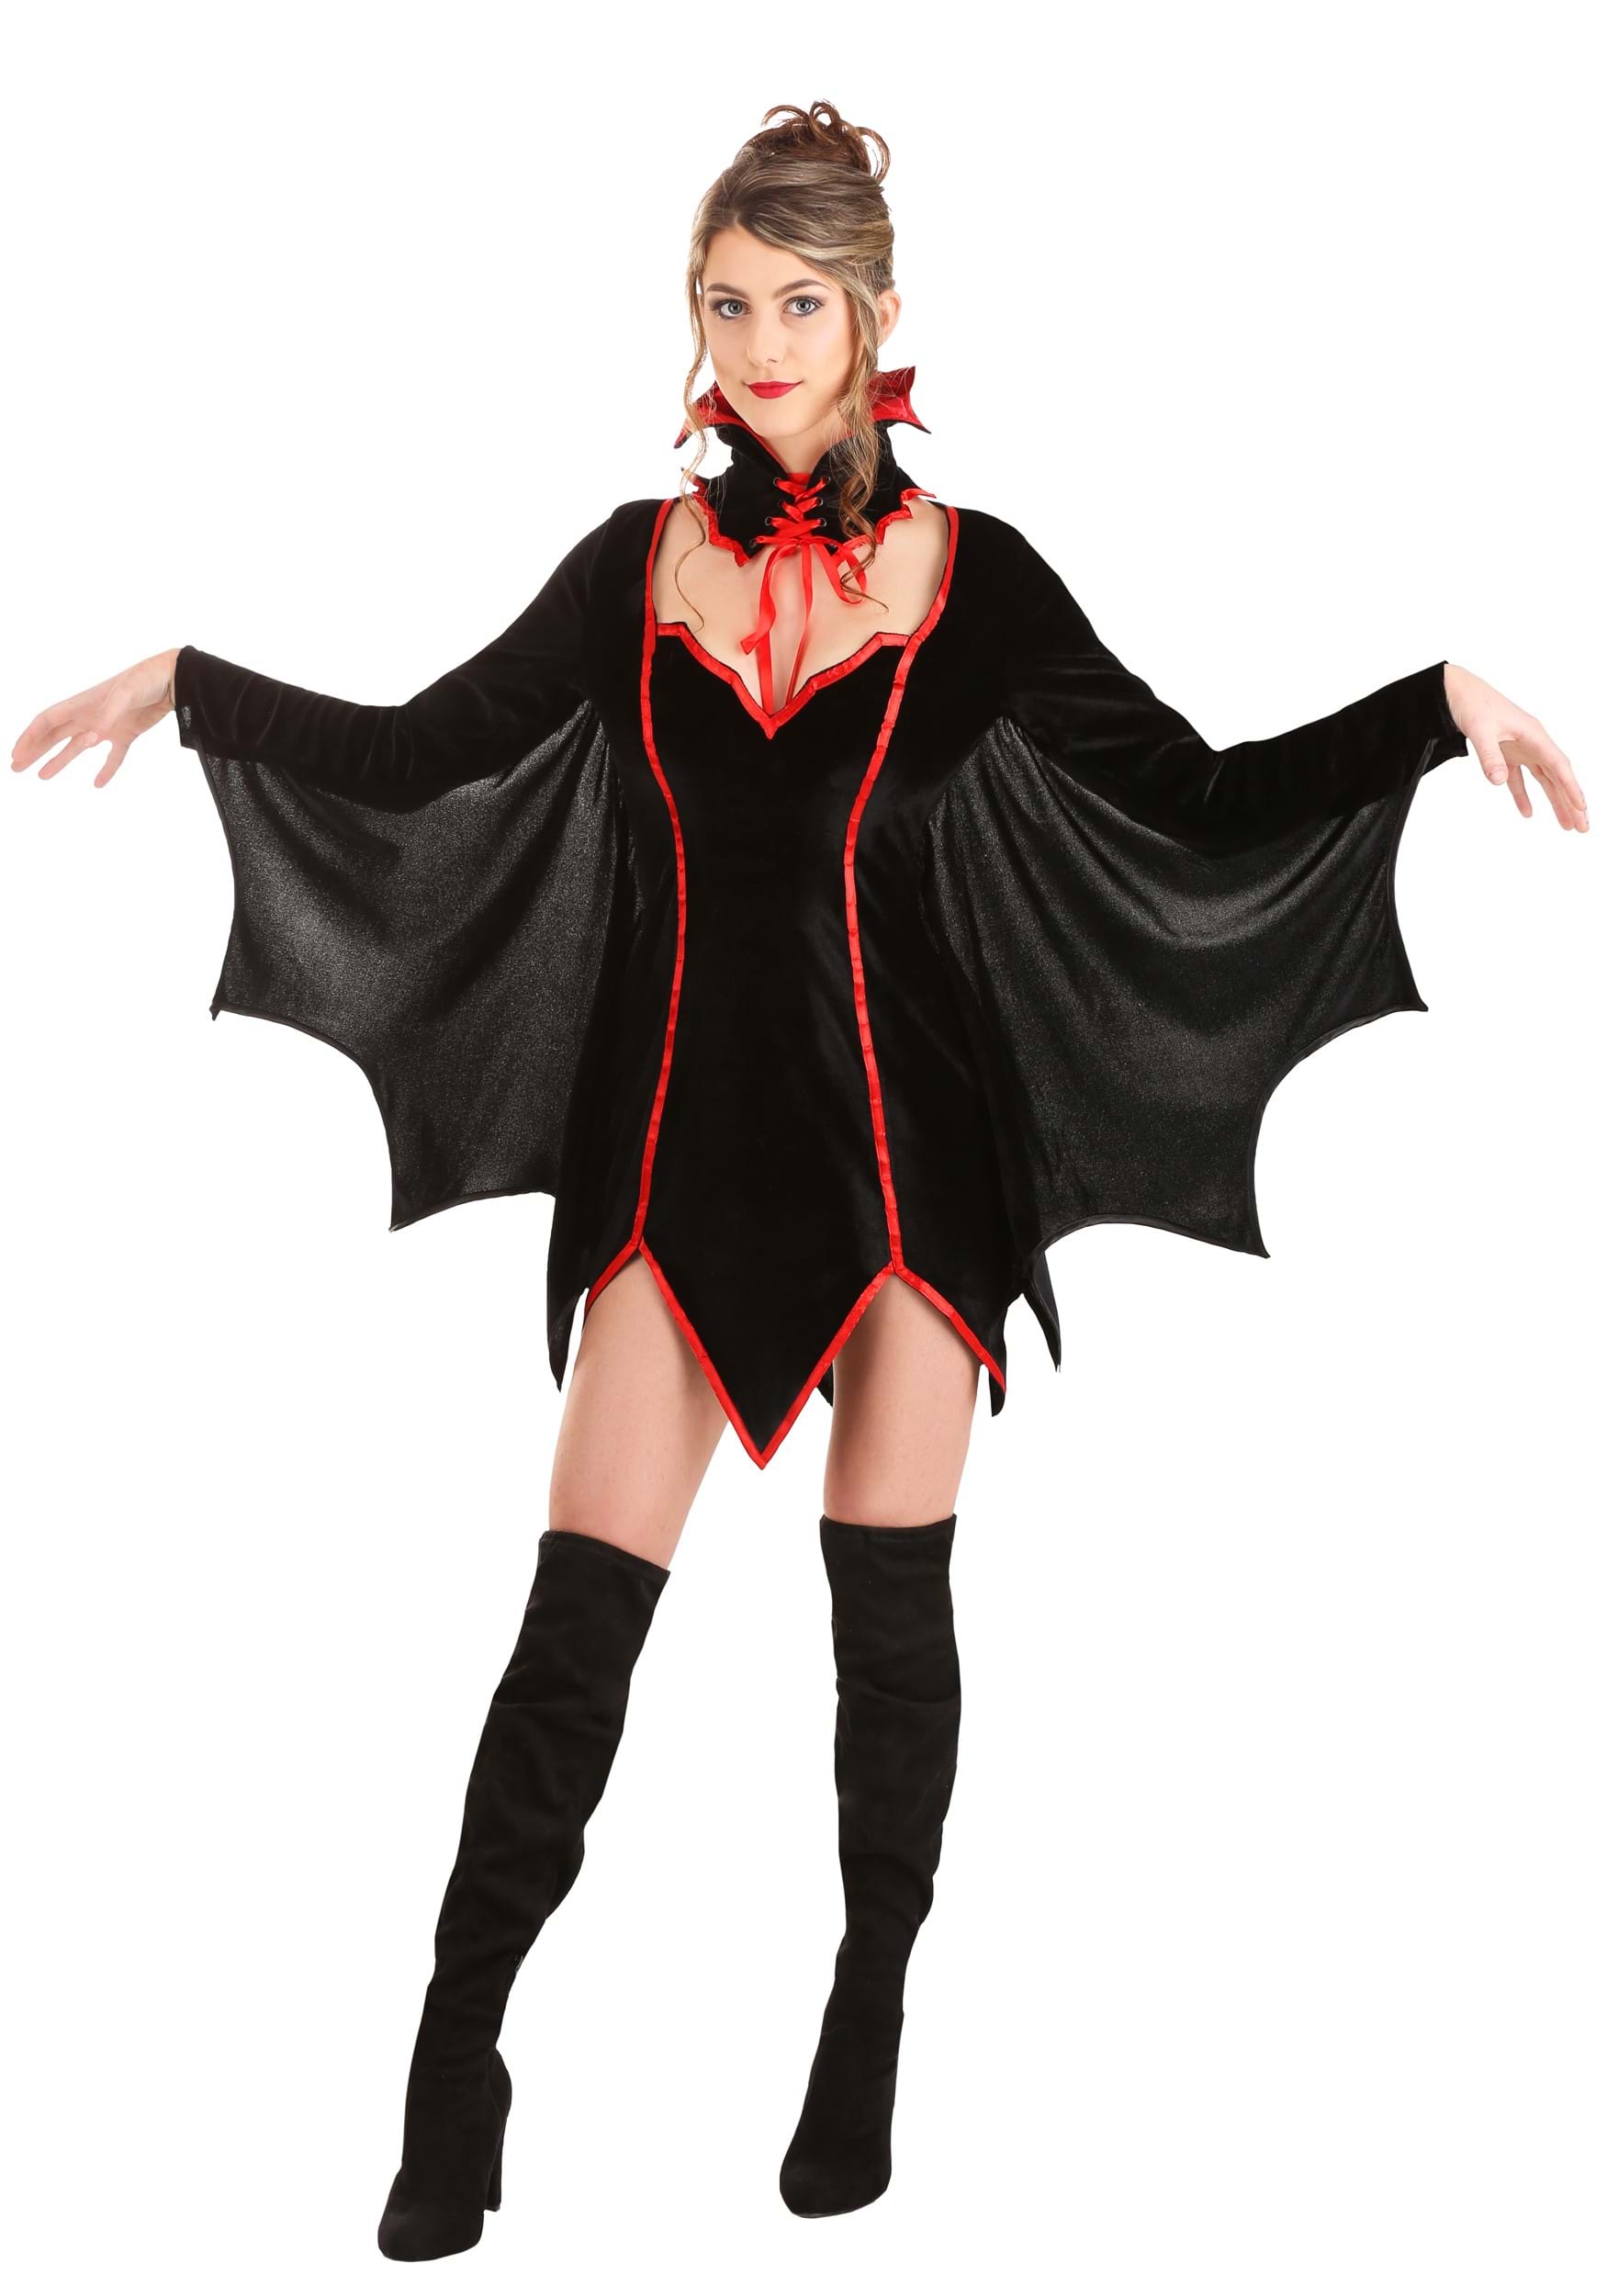 Exclusive Lady Dracula Costume